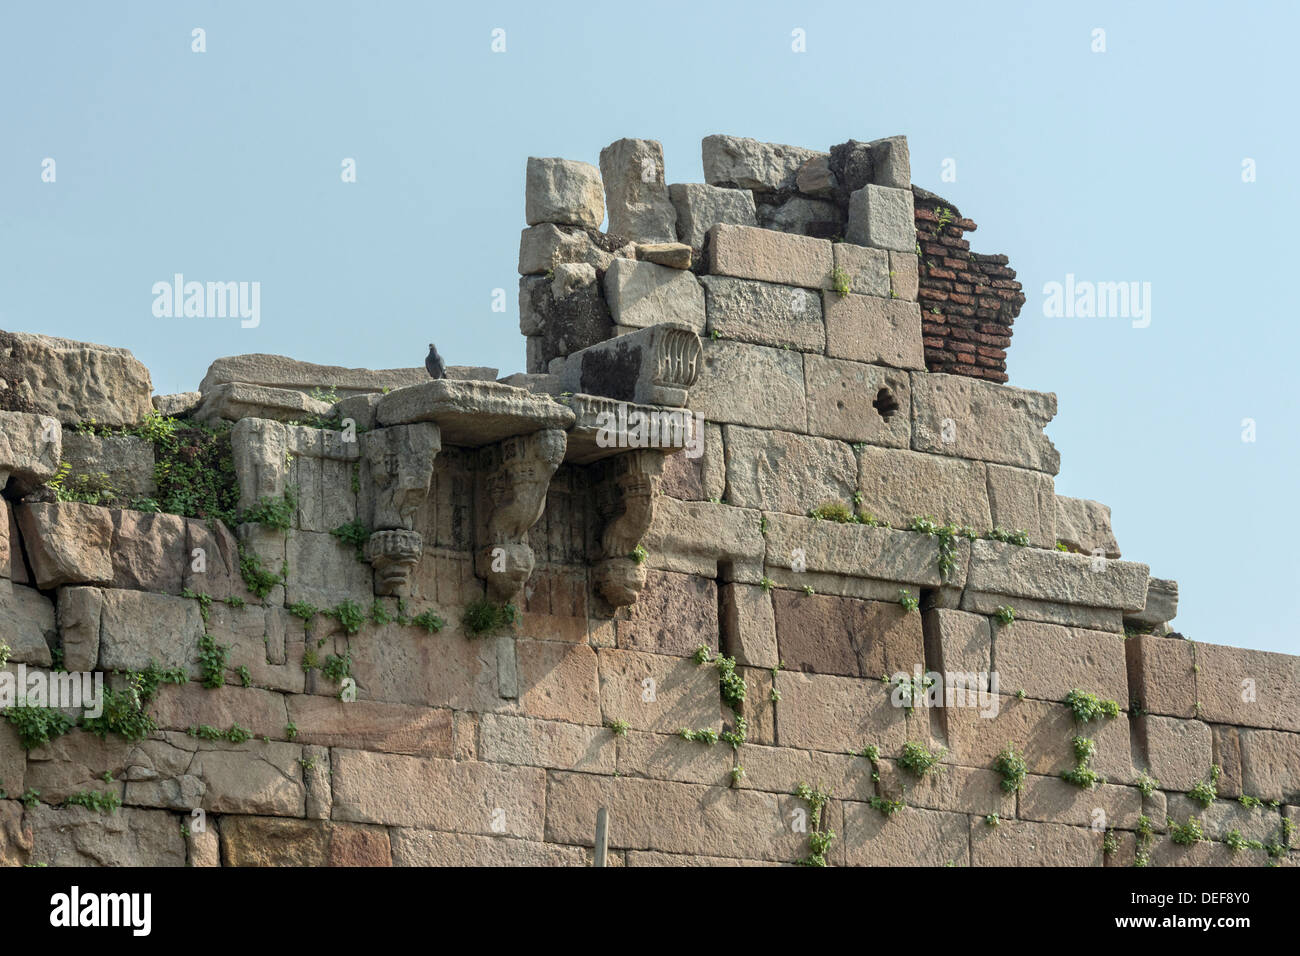 Remains of a jharokha  (window) on the fortress wall surrounding the Champaner archaeological site, Gujurat State, India Stock Photo